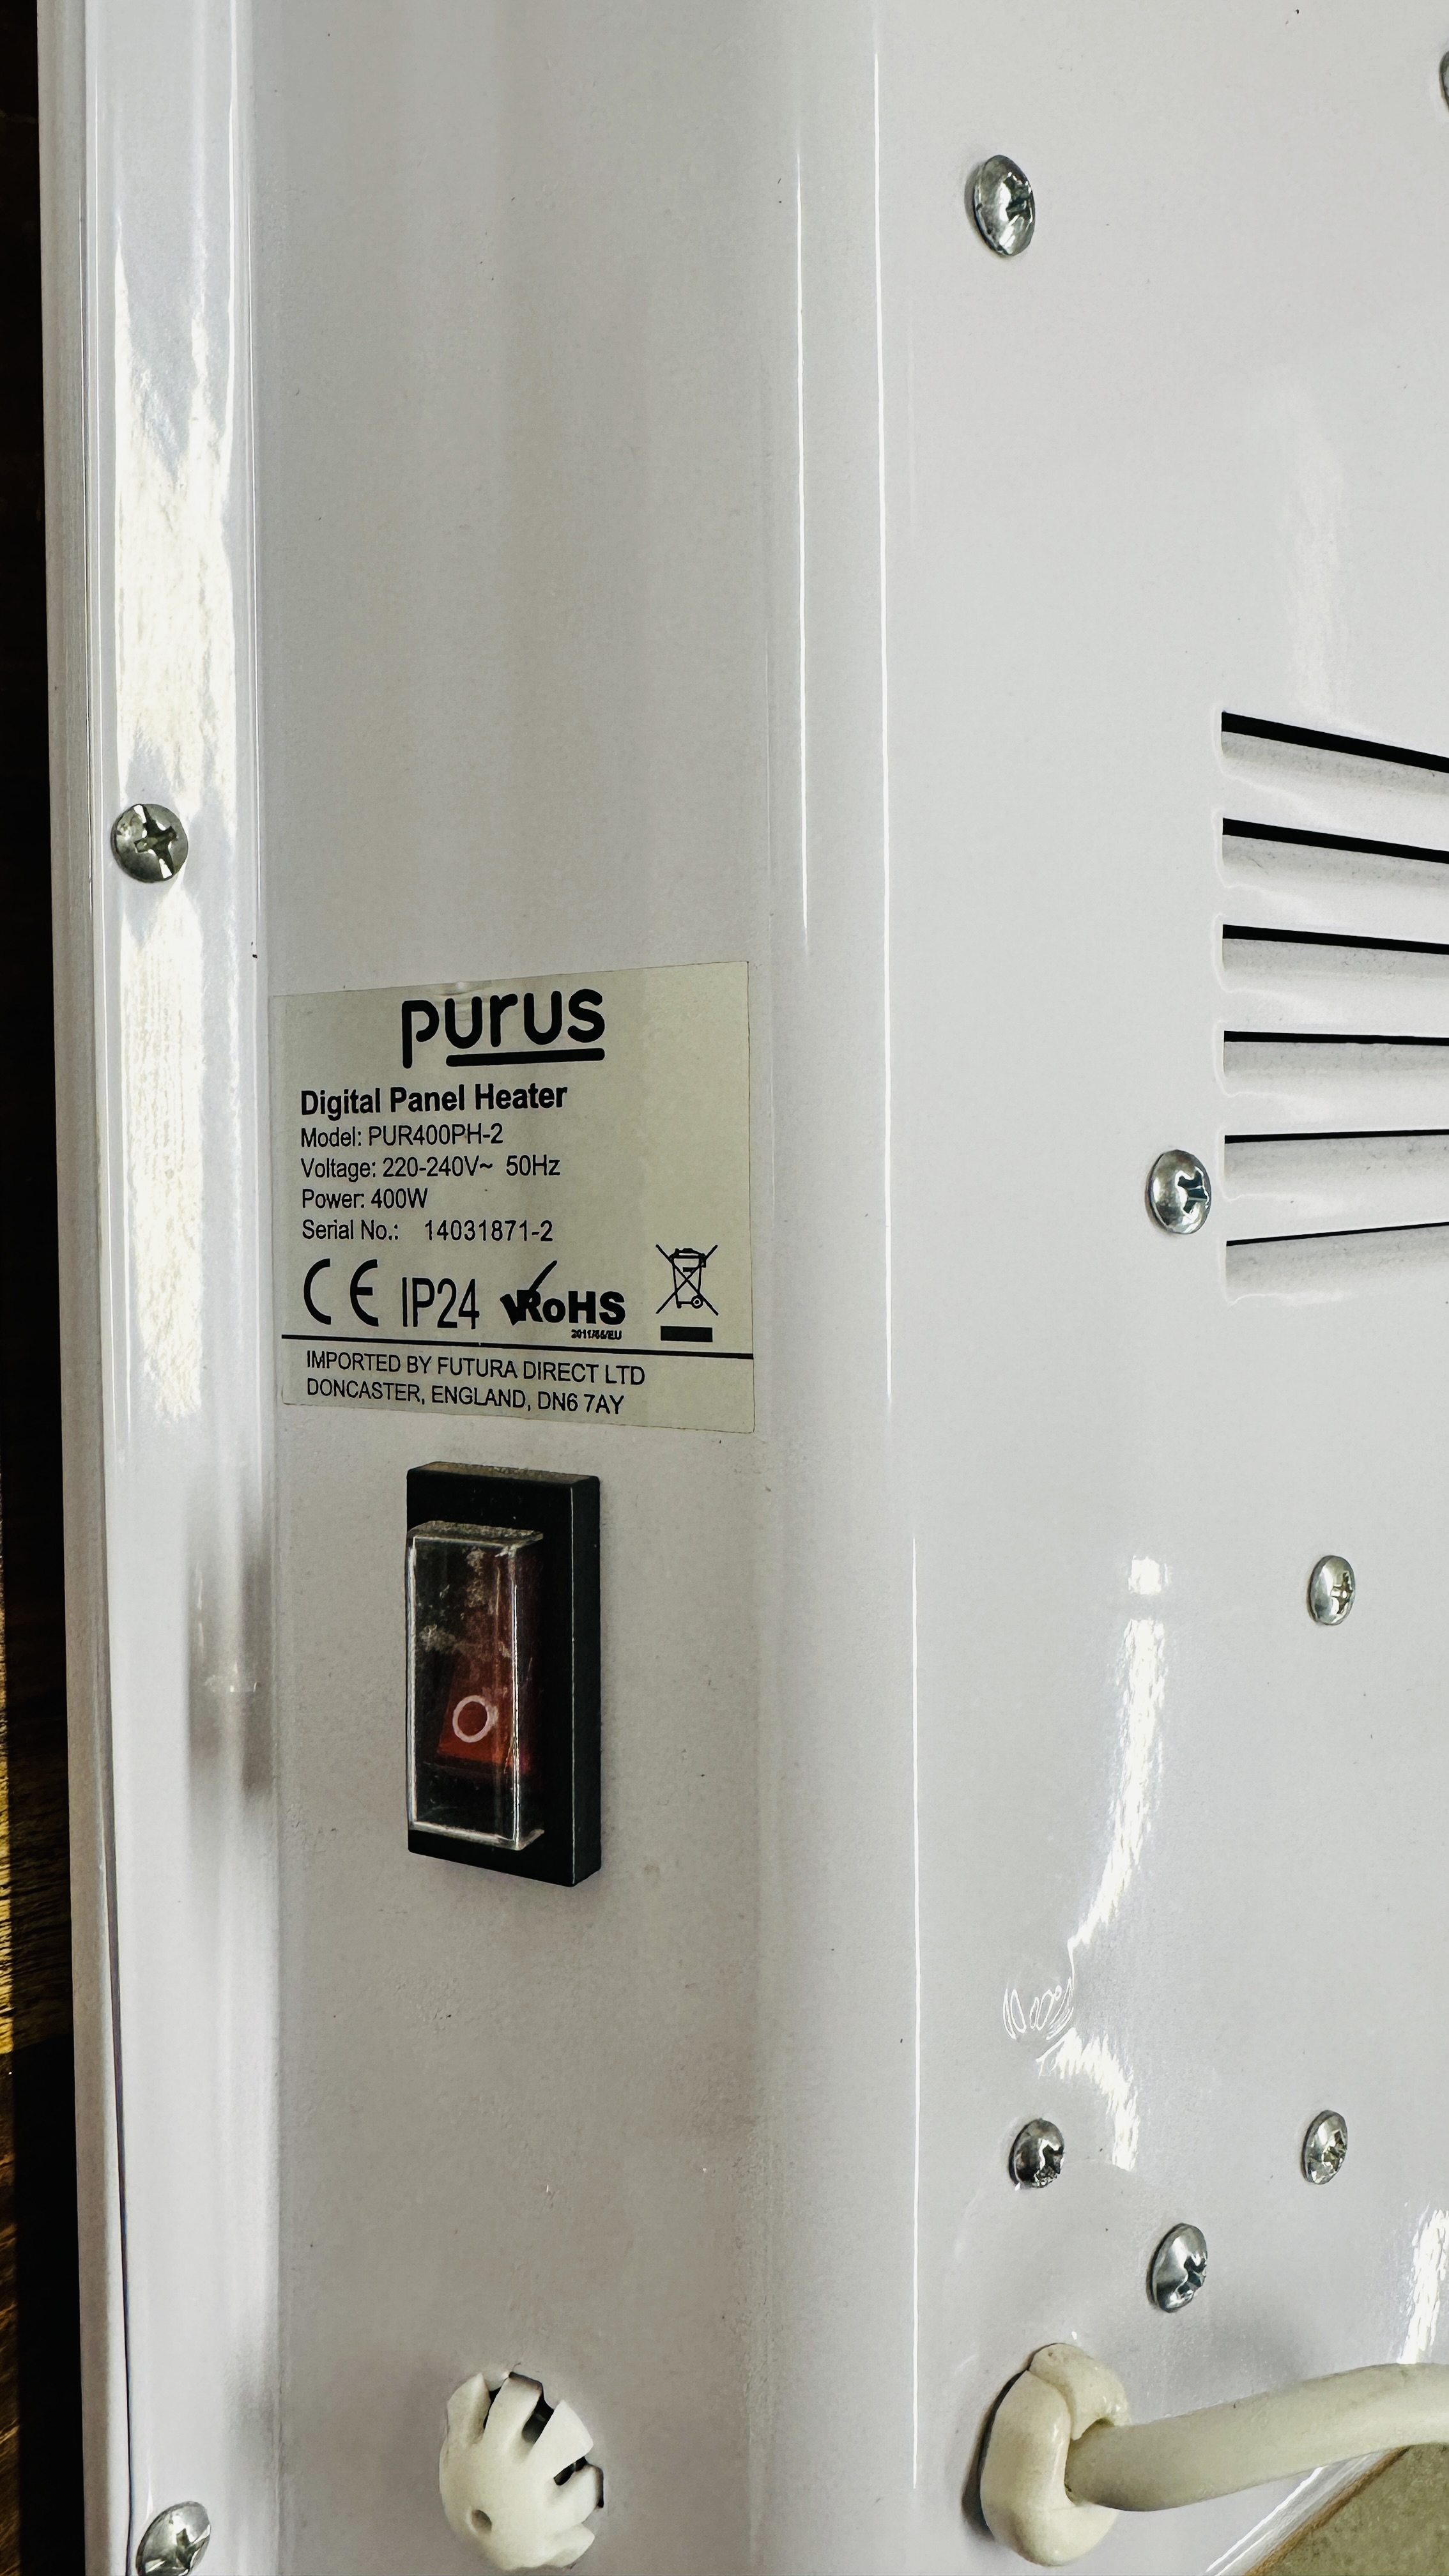 PURUS DIGITAL WALL PANEL HEATER - SOLD AS SEEN. - Image 3 of 3